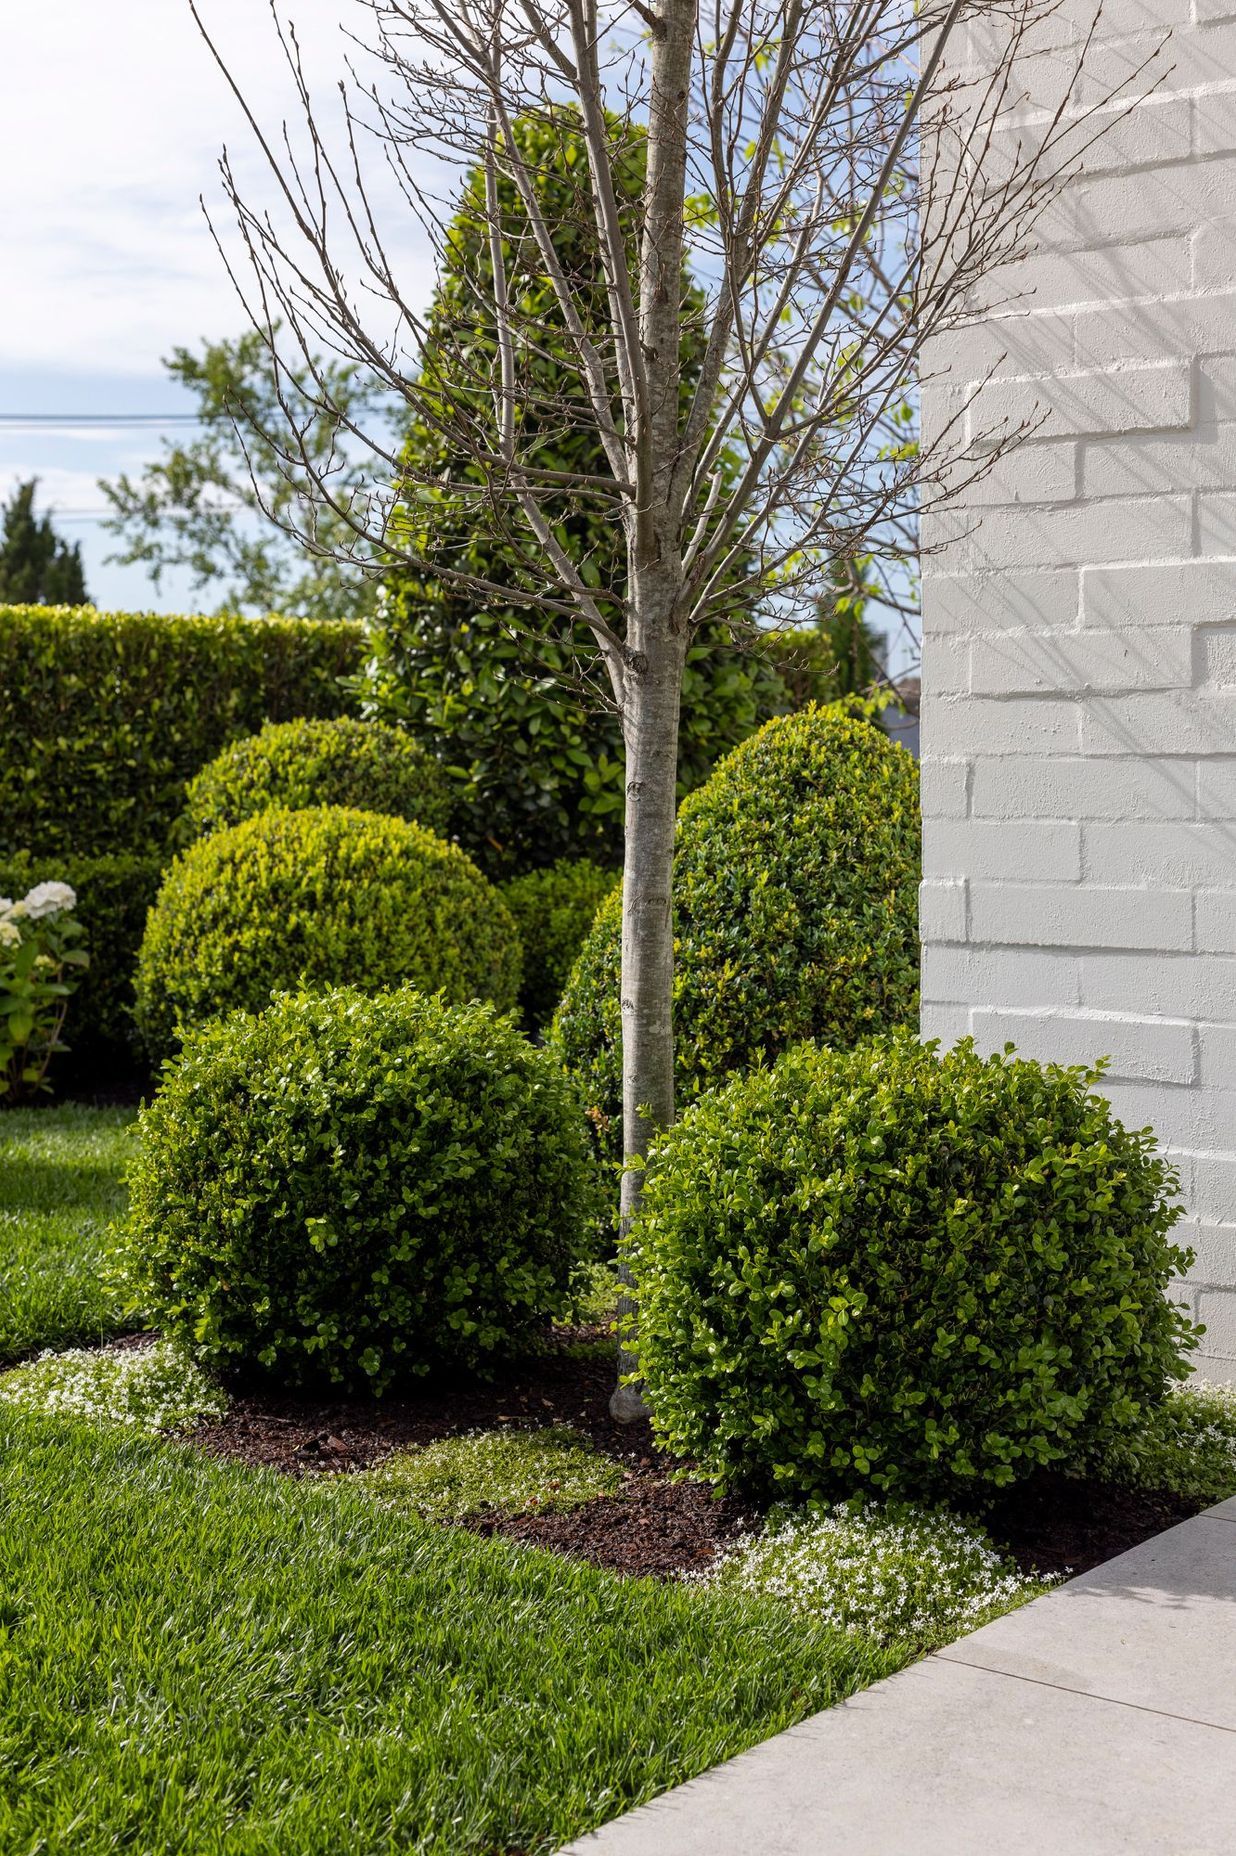 Topiaries of different sizes were selected by the owner, adding shape and texture to this inner-city garden.